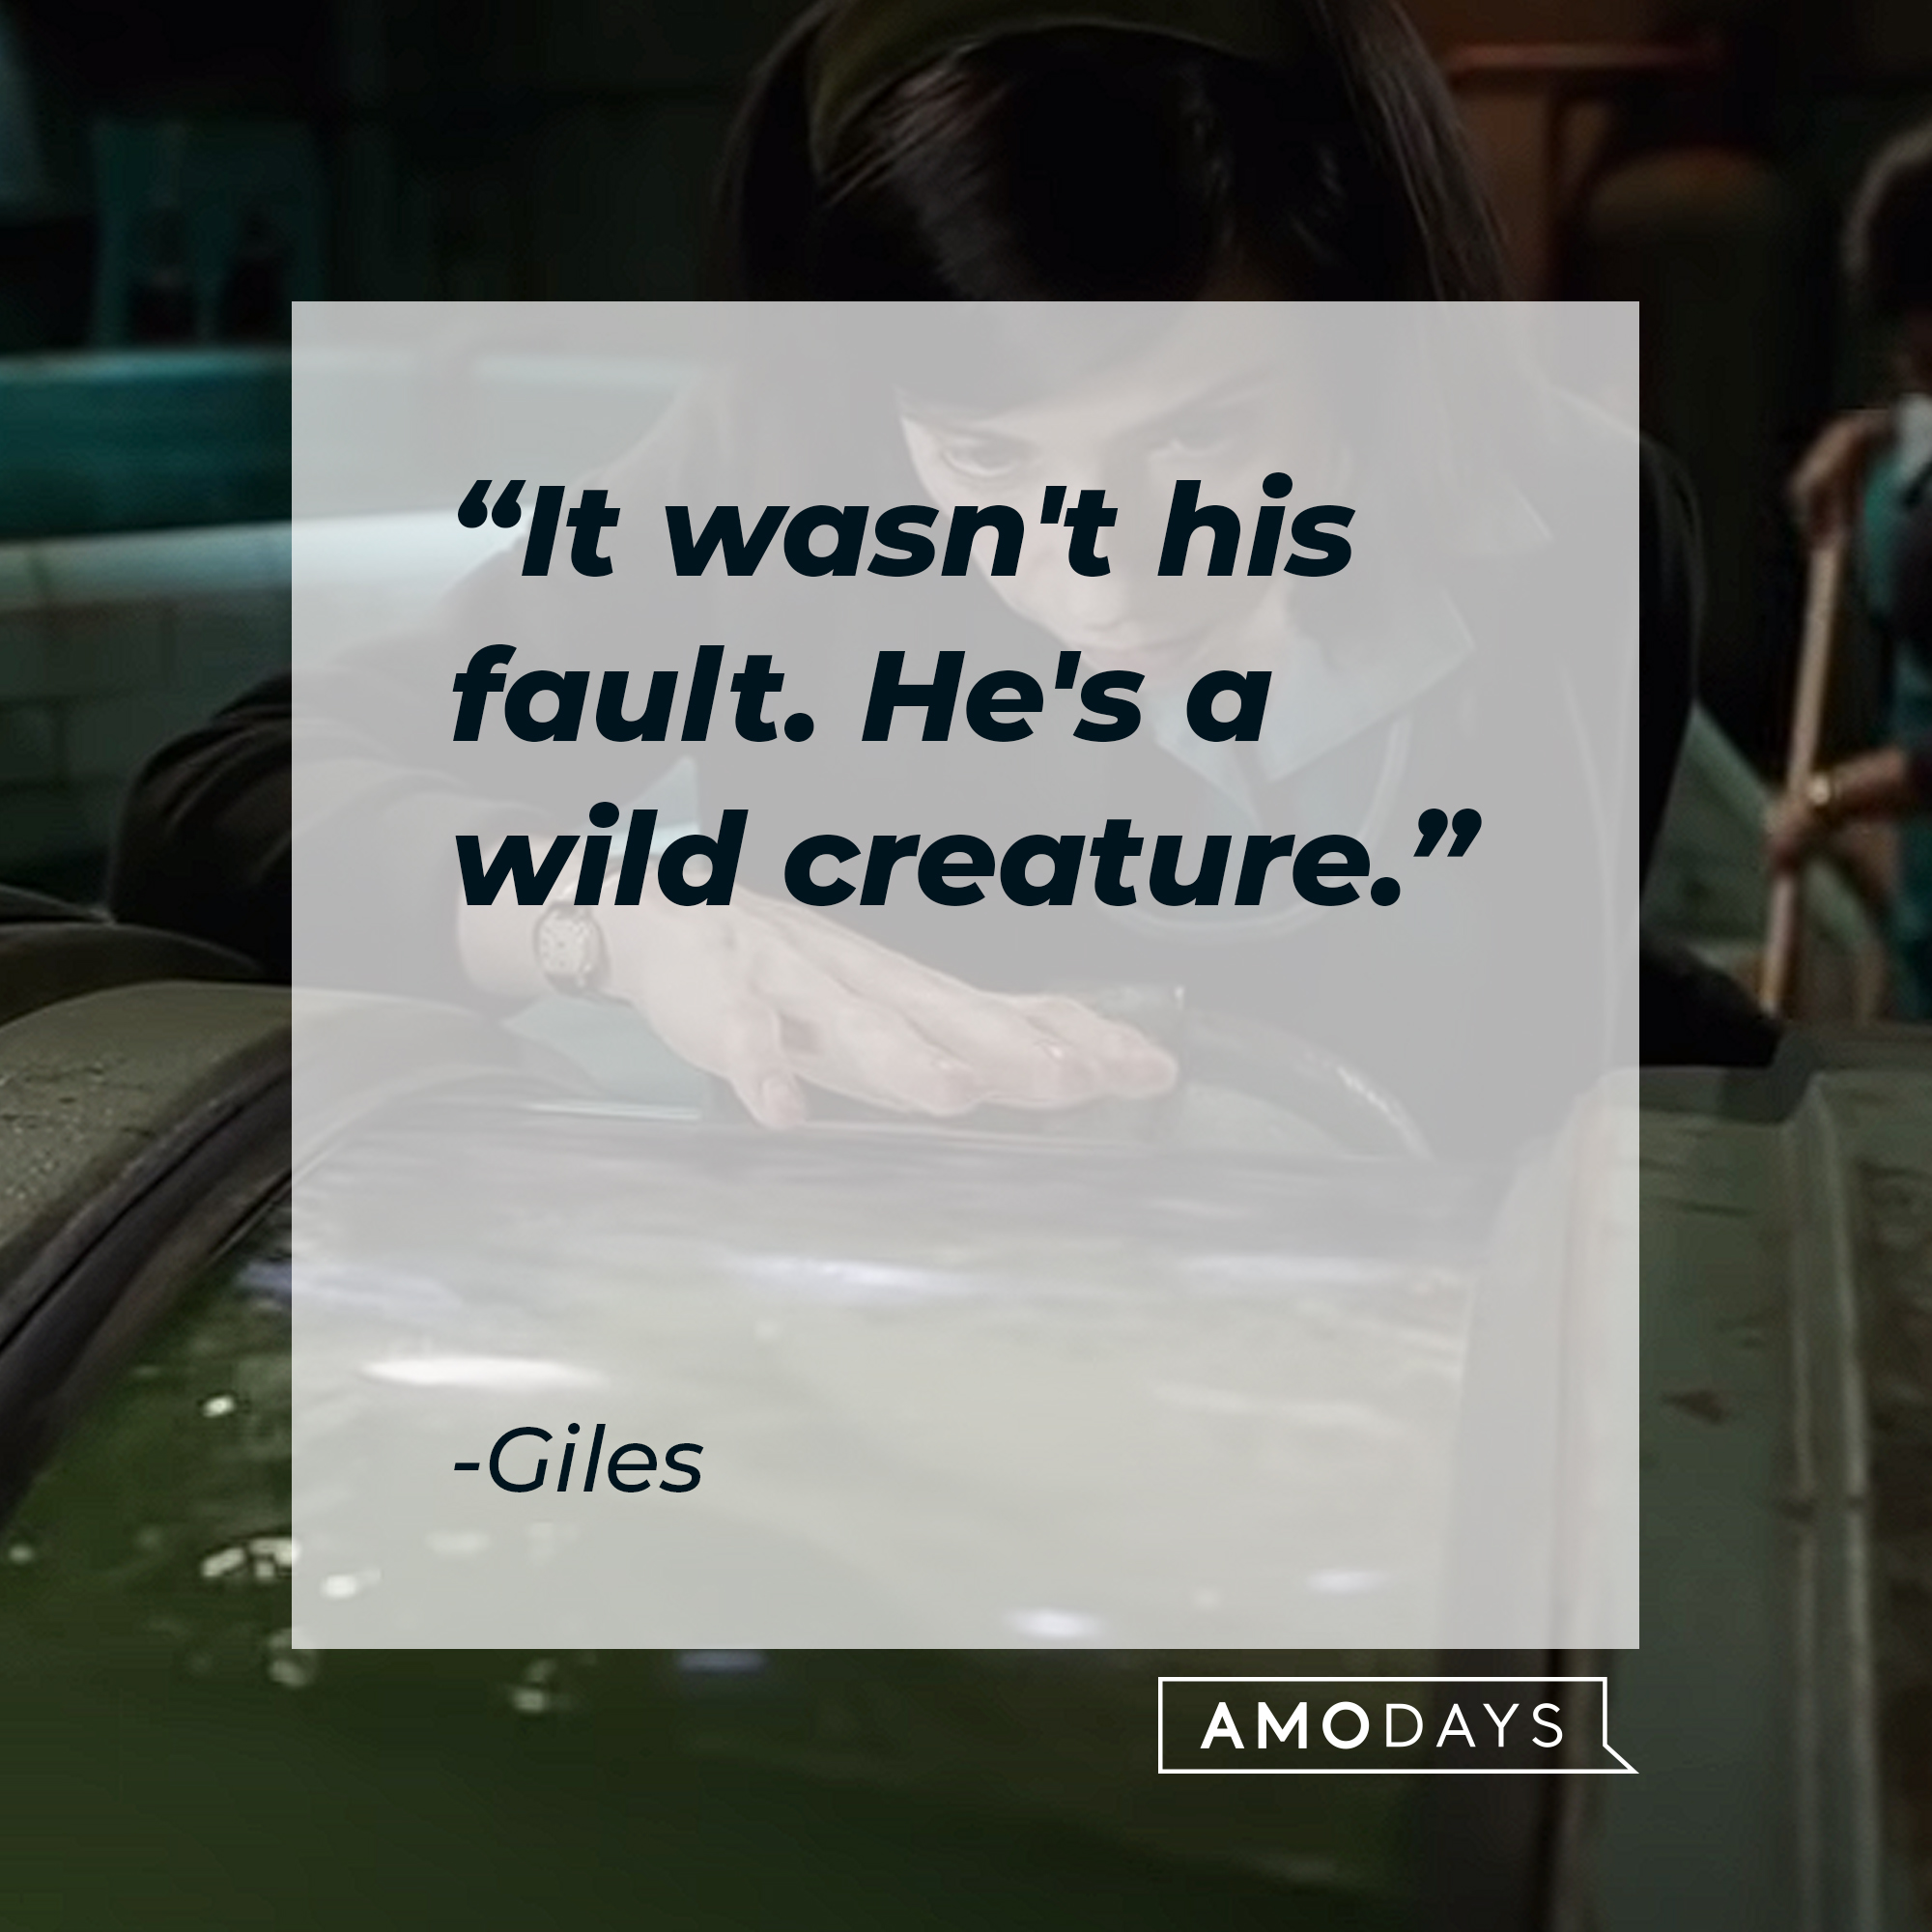 Giles's quote : “It wasn’t his fault. He’s a wild creature.” | Source:youtube.com/searchlightpictures